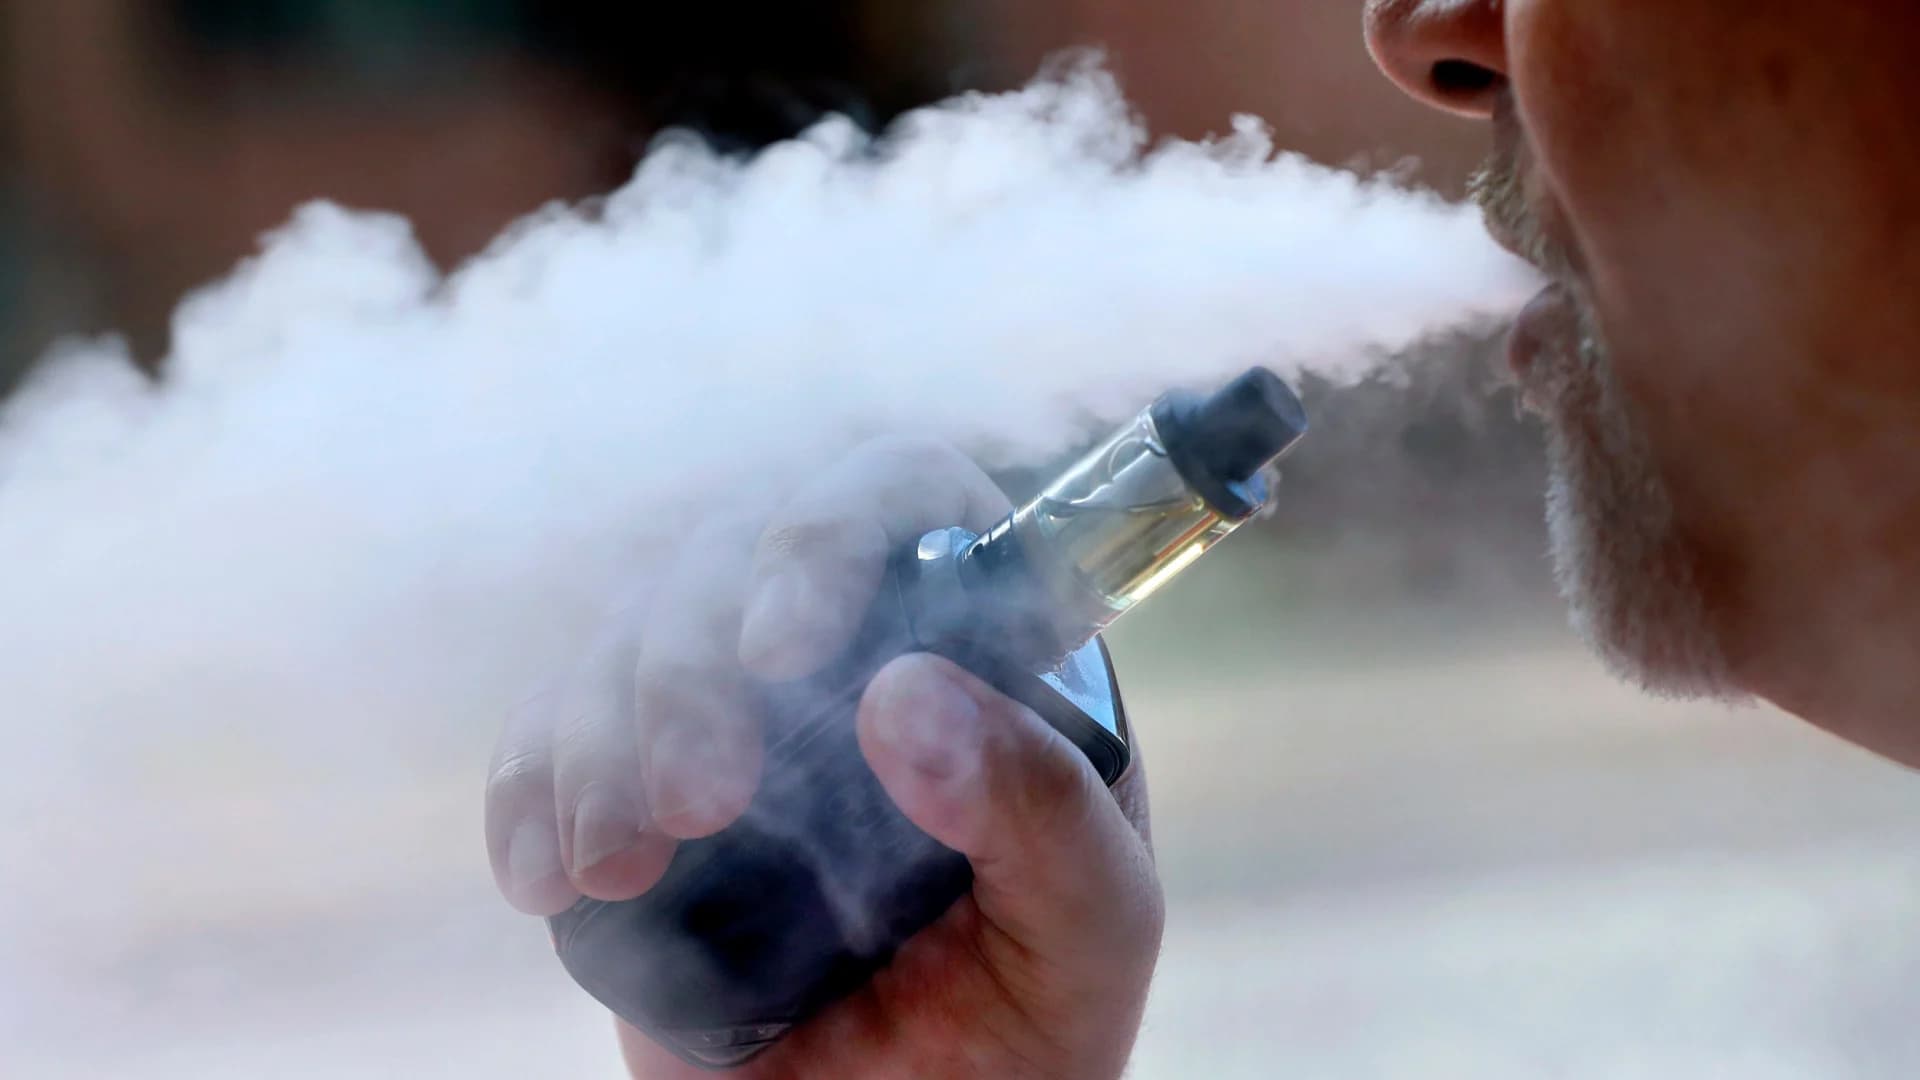 Cuomo announces emergency executive action to ban sale of flavored e-cigarettes